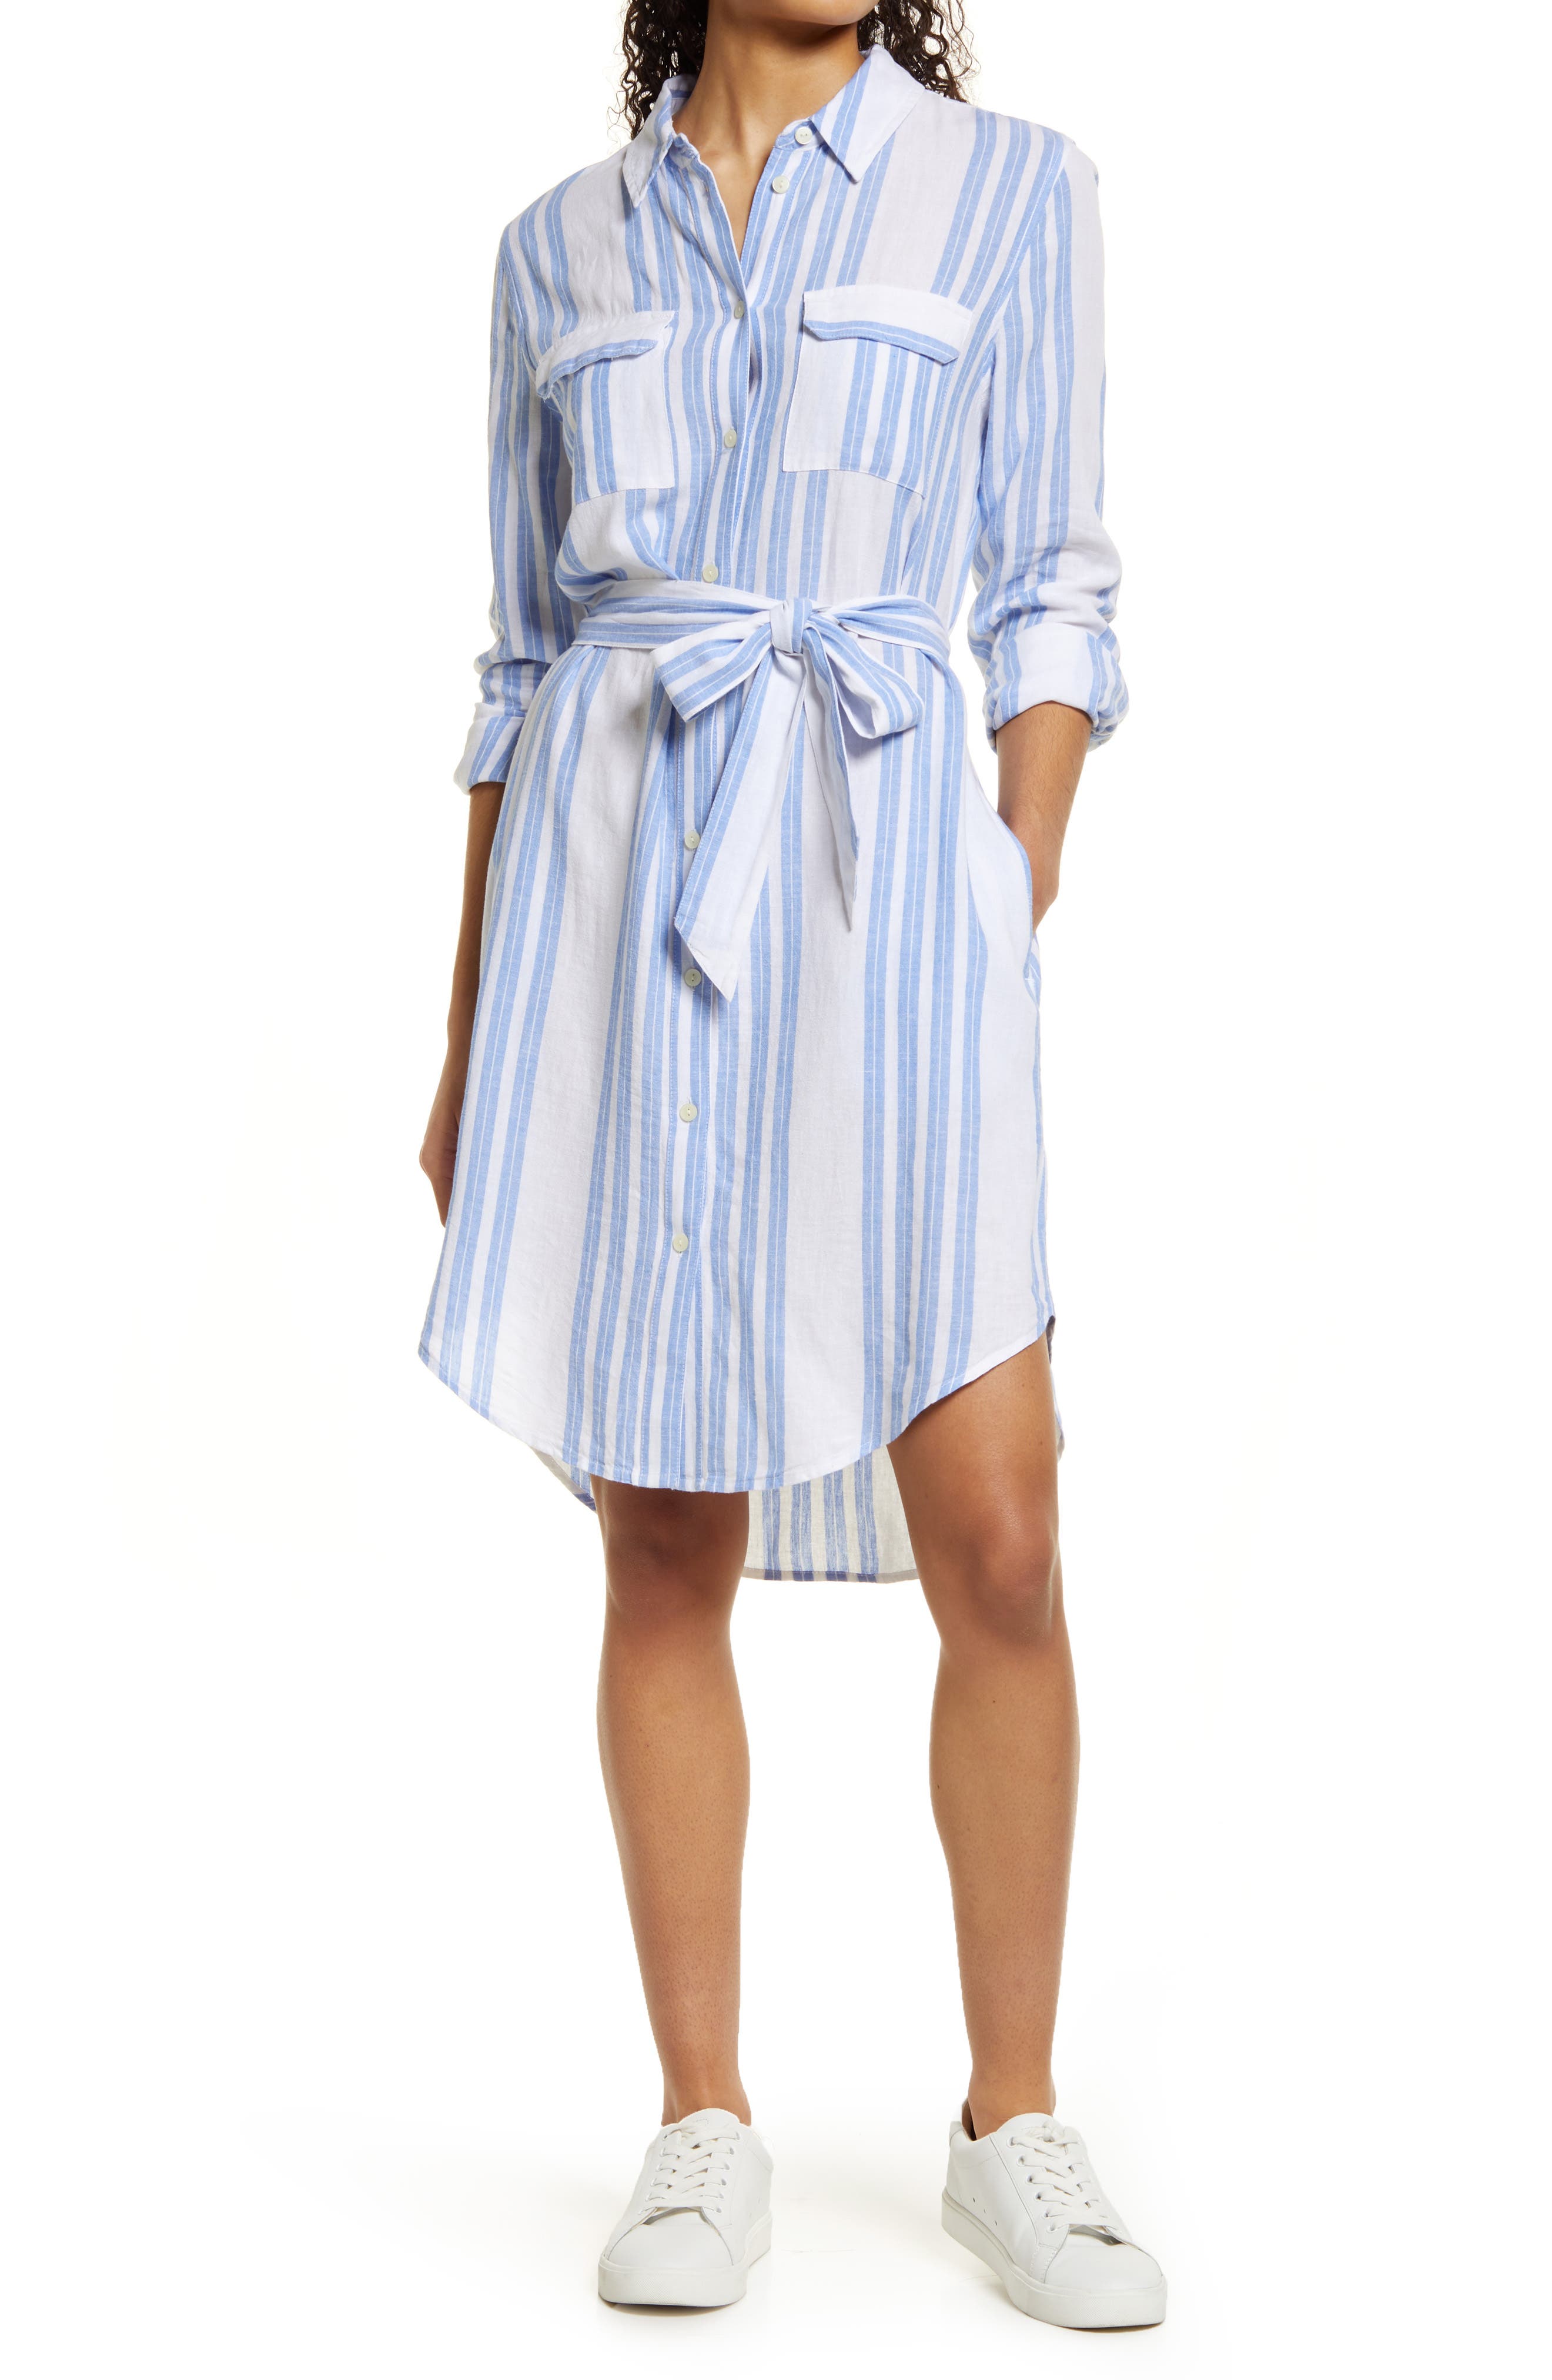 blue and white striped dress | Nordstrom